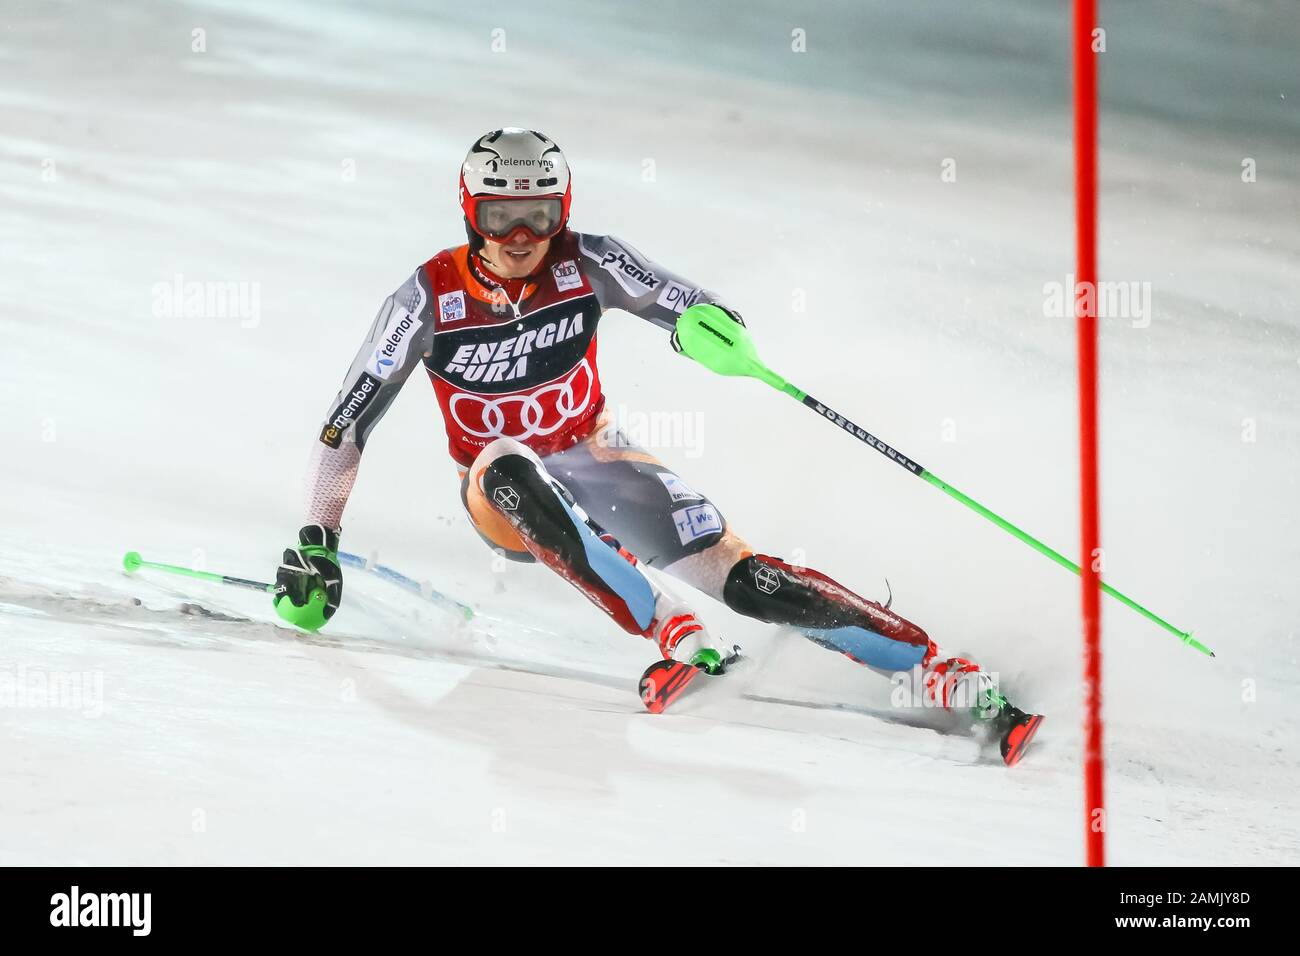 Zagreb, Croatia - January 5, 2020 : Henrik Kristoffersen from Norway  competing on the 2nd run during the Audi FIS Alpine Ski World Cup 2019/2020,  3rd Stock Photo - Alamy